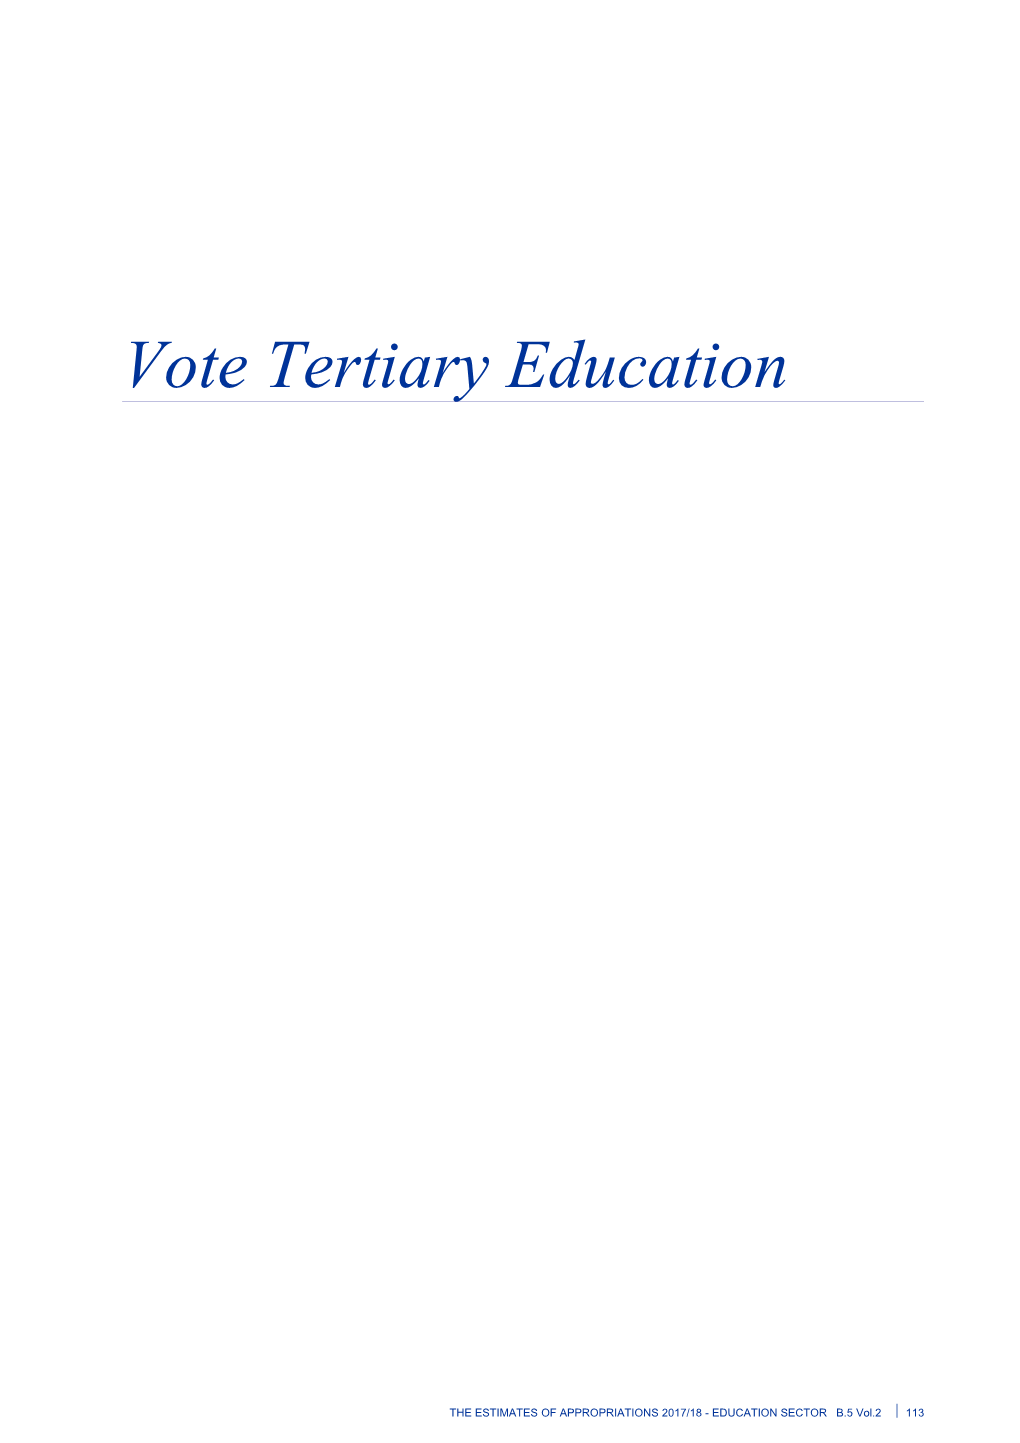 Vote Tertiary Education - Vol 2 Education Sector - the Estimates of Appropriations 2017/18